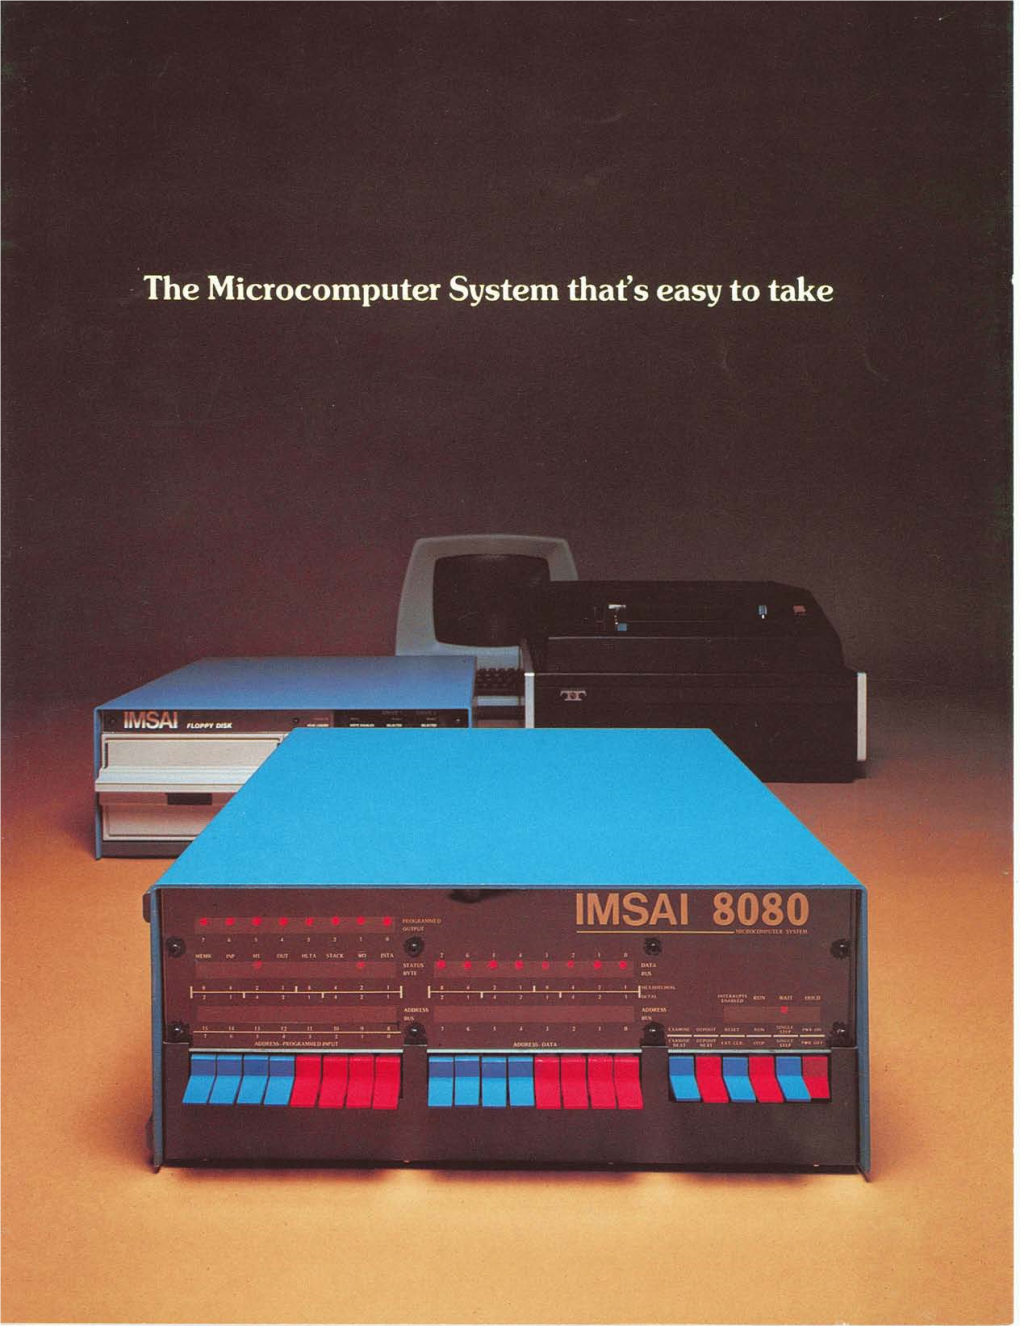 IMSAI 8080 8080 Has Made IMS Associates, Inc., Or Expand Its Capabilities Easily One of the World's Largest Manufac- Economically